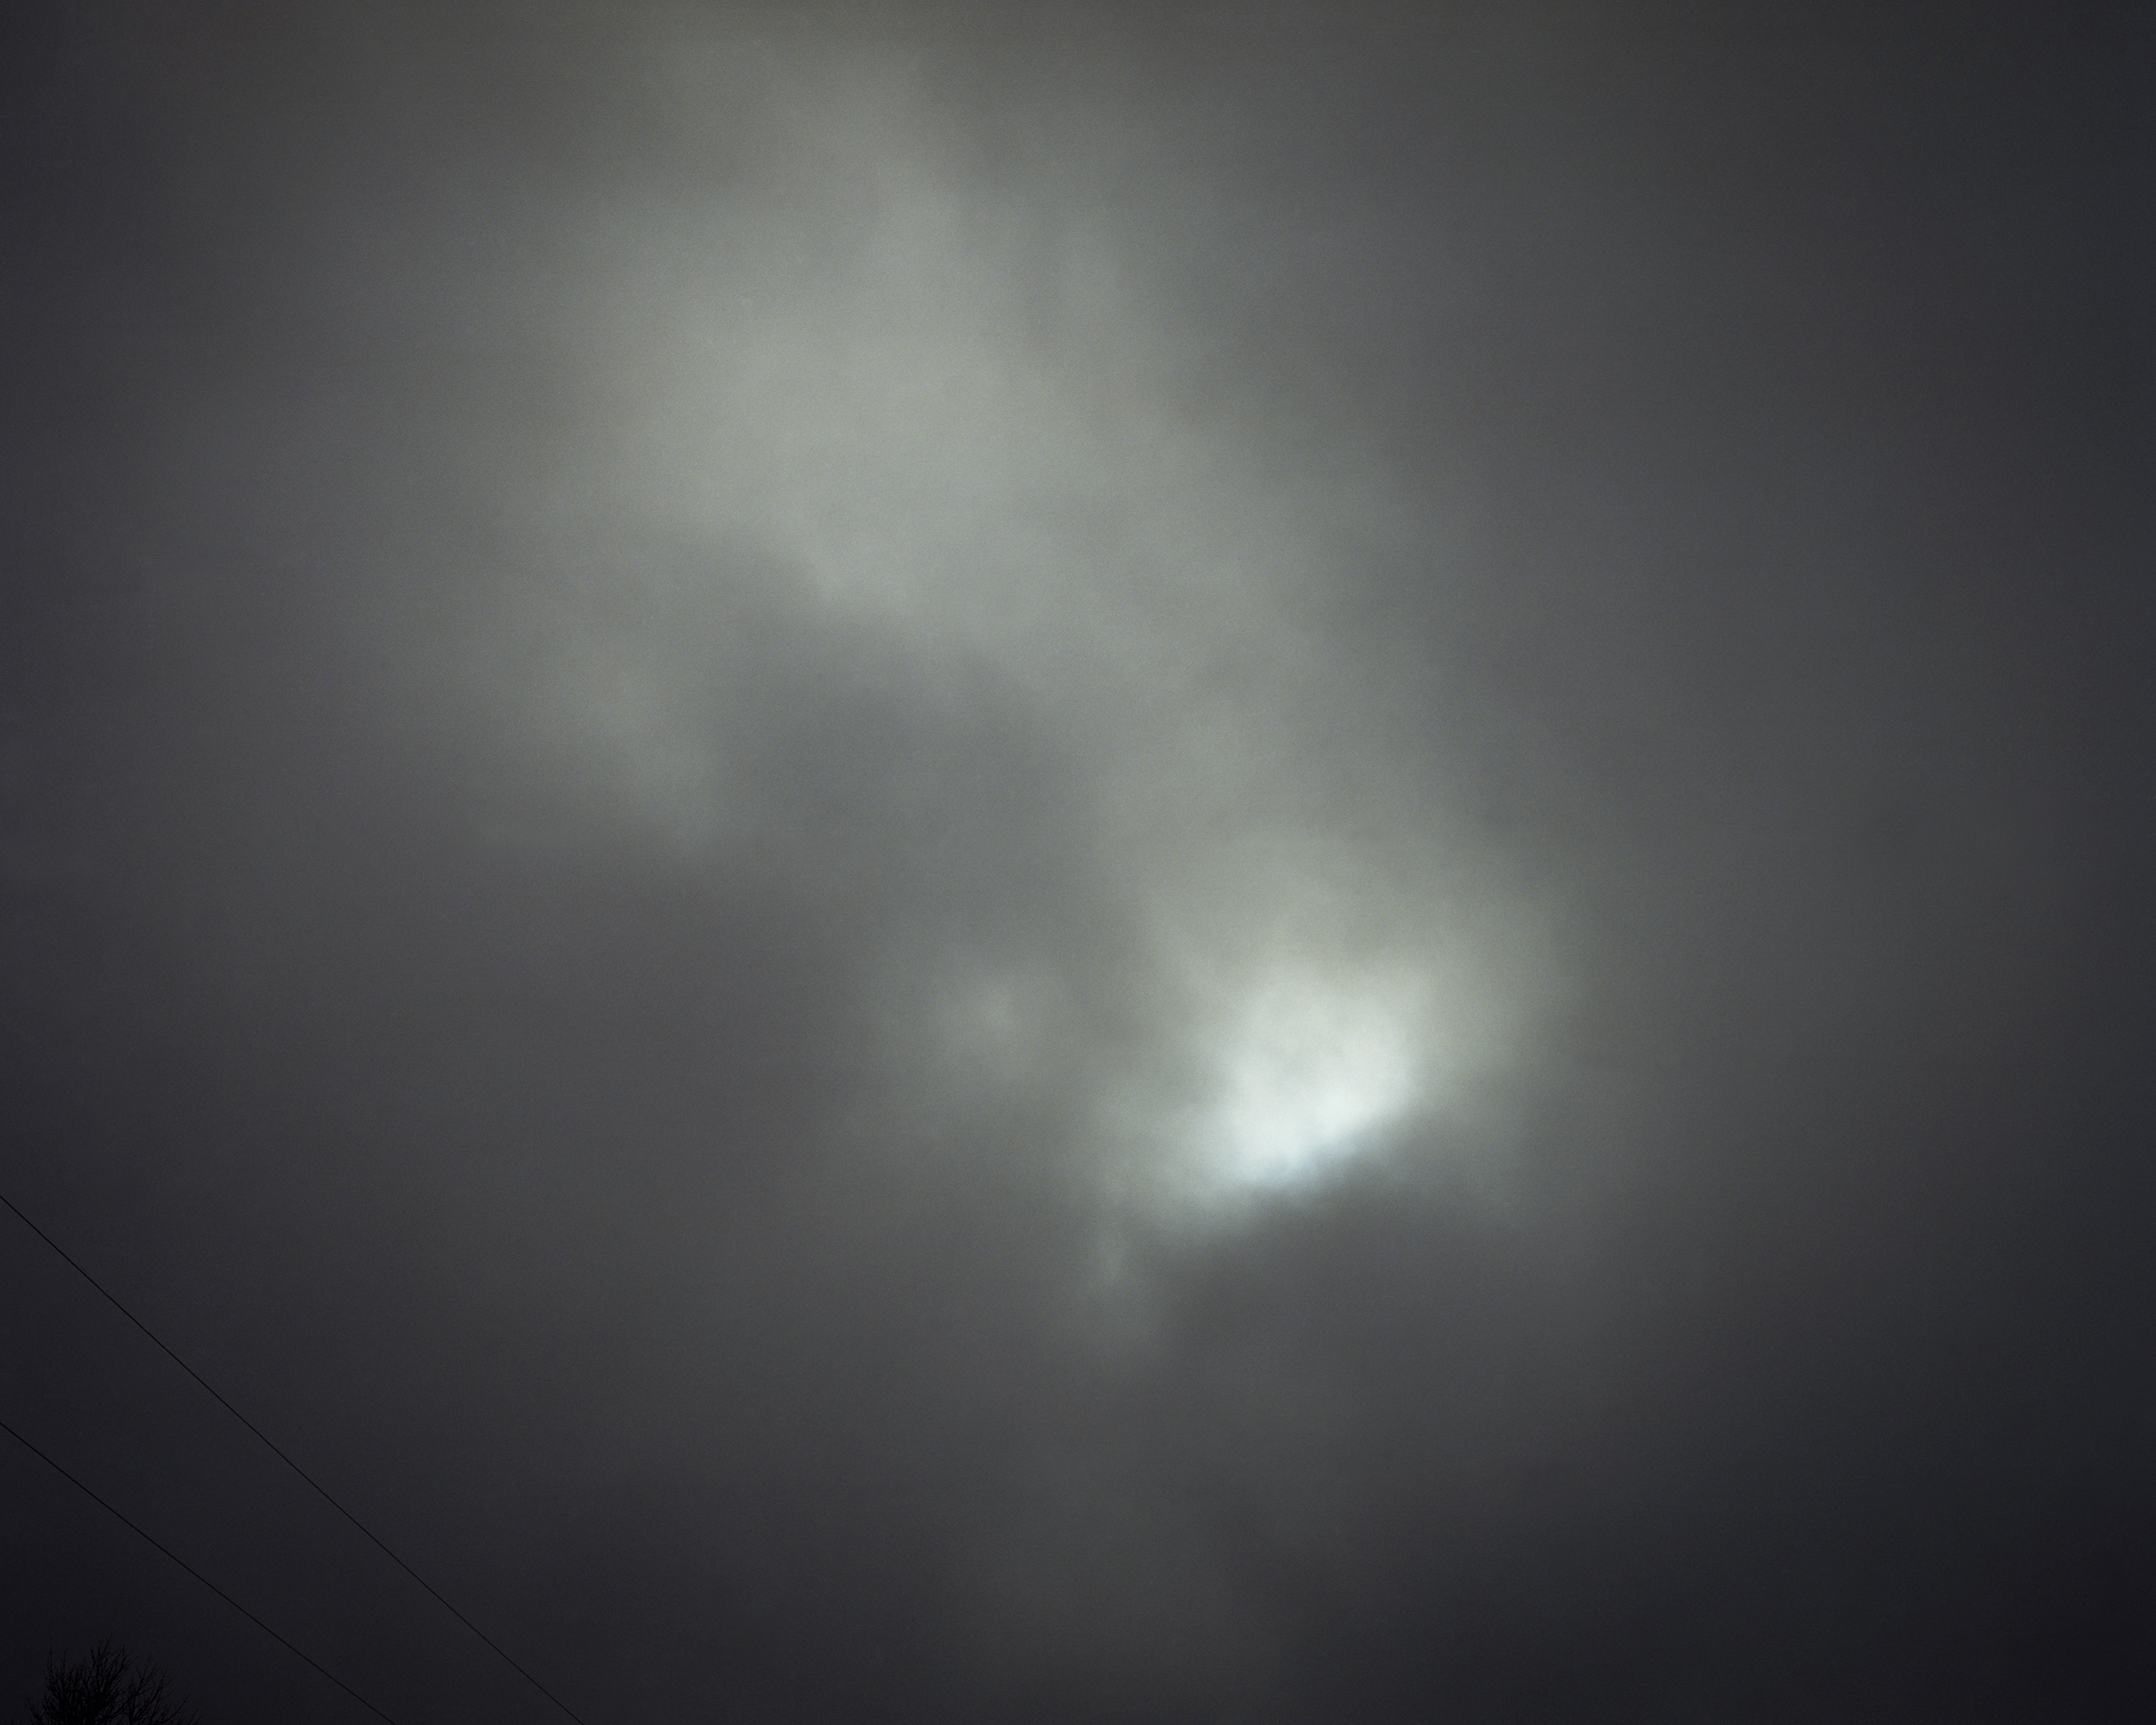 Mist and Exhalations20130718_8.jpg